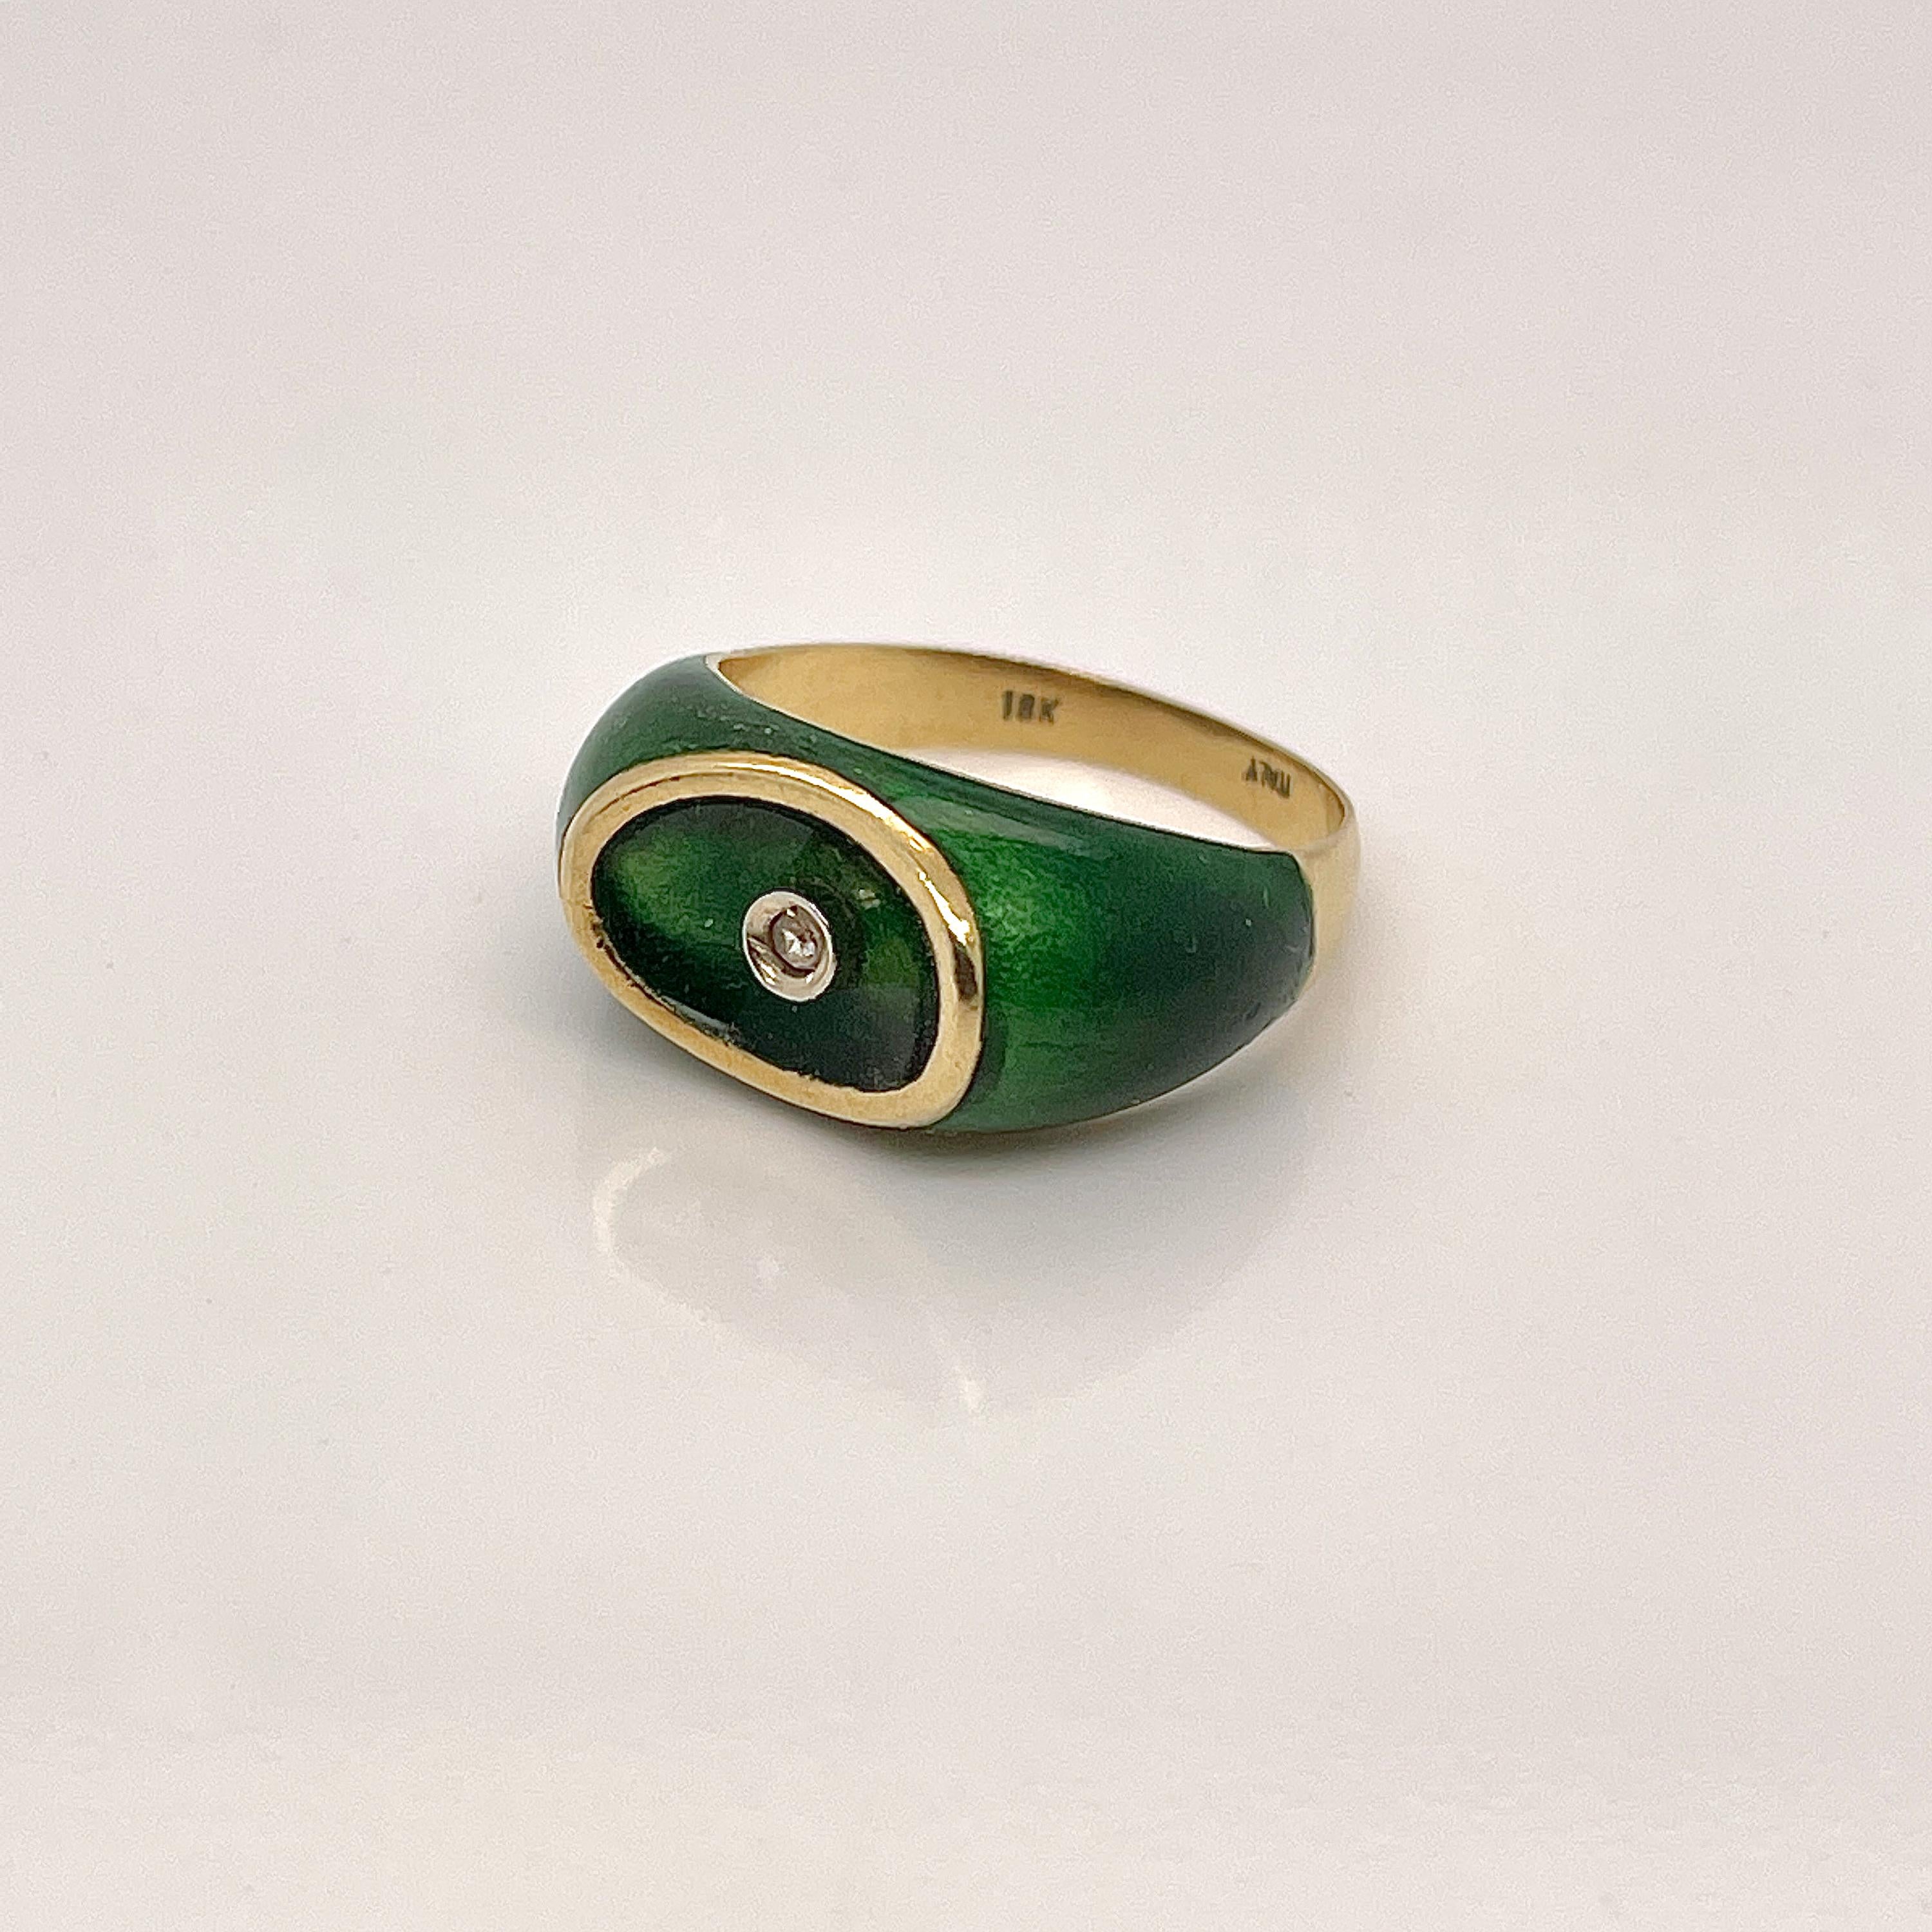 A very fine Italian gold and green enamel signet ring.

In 18k yellow gold. 

With a bezel set tiny, round aquamarine in center and enamel with green vitreous enamel to the head and shoulders. 

The top of the signet ring is oval shaped with an oval